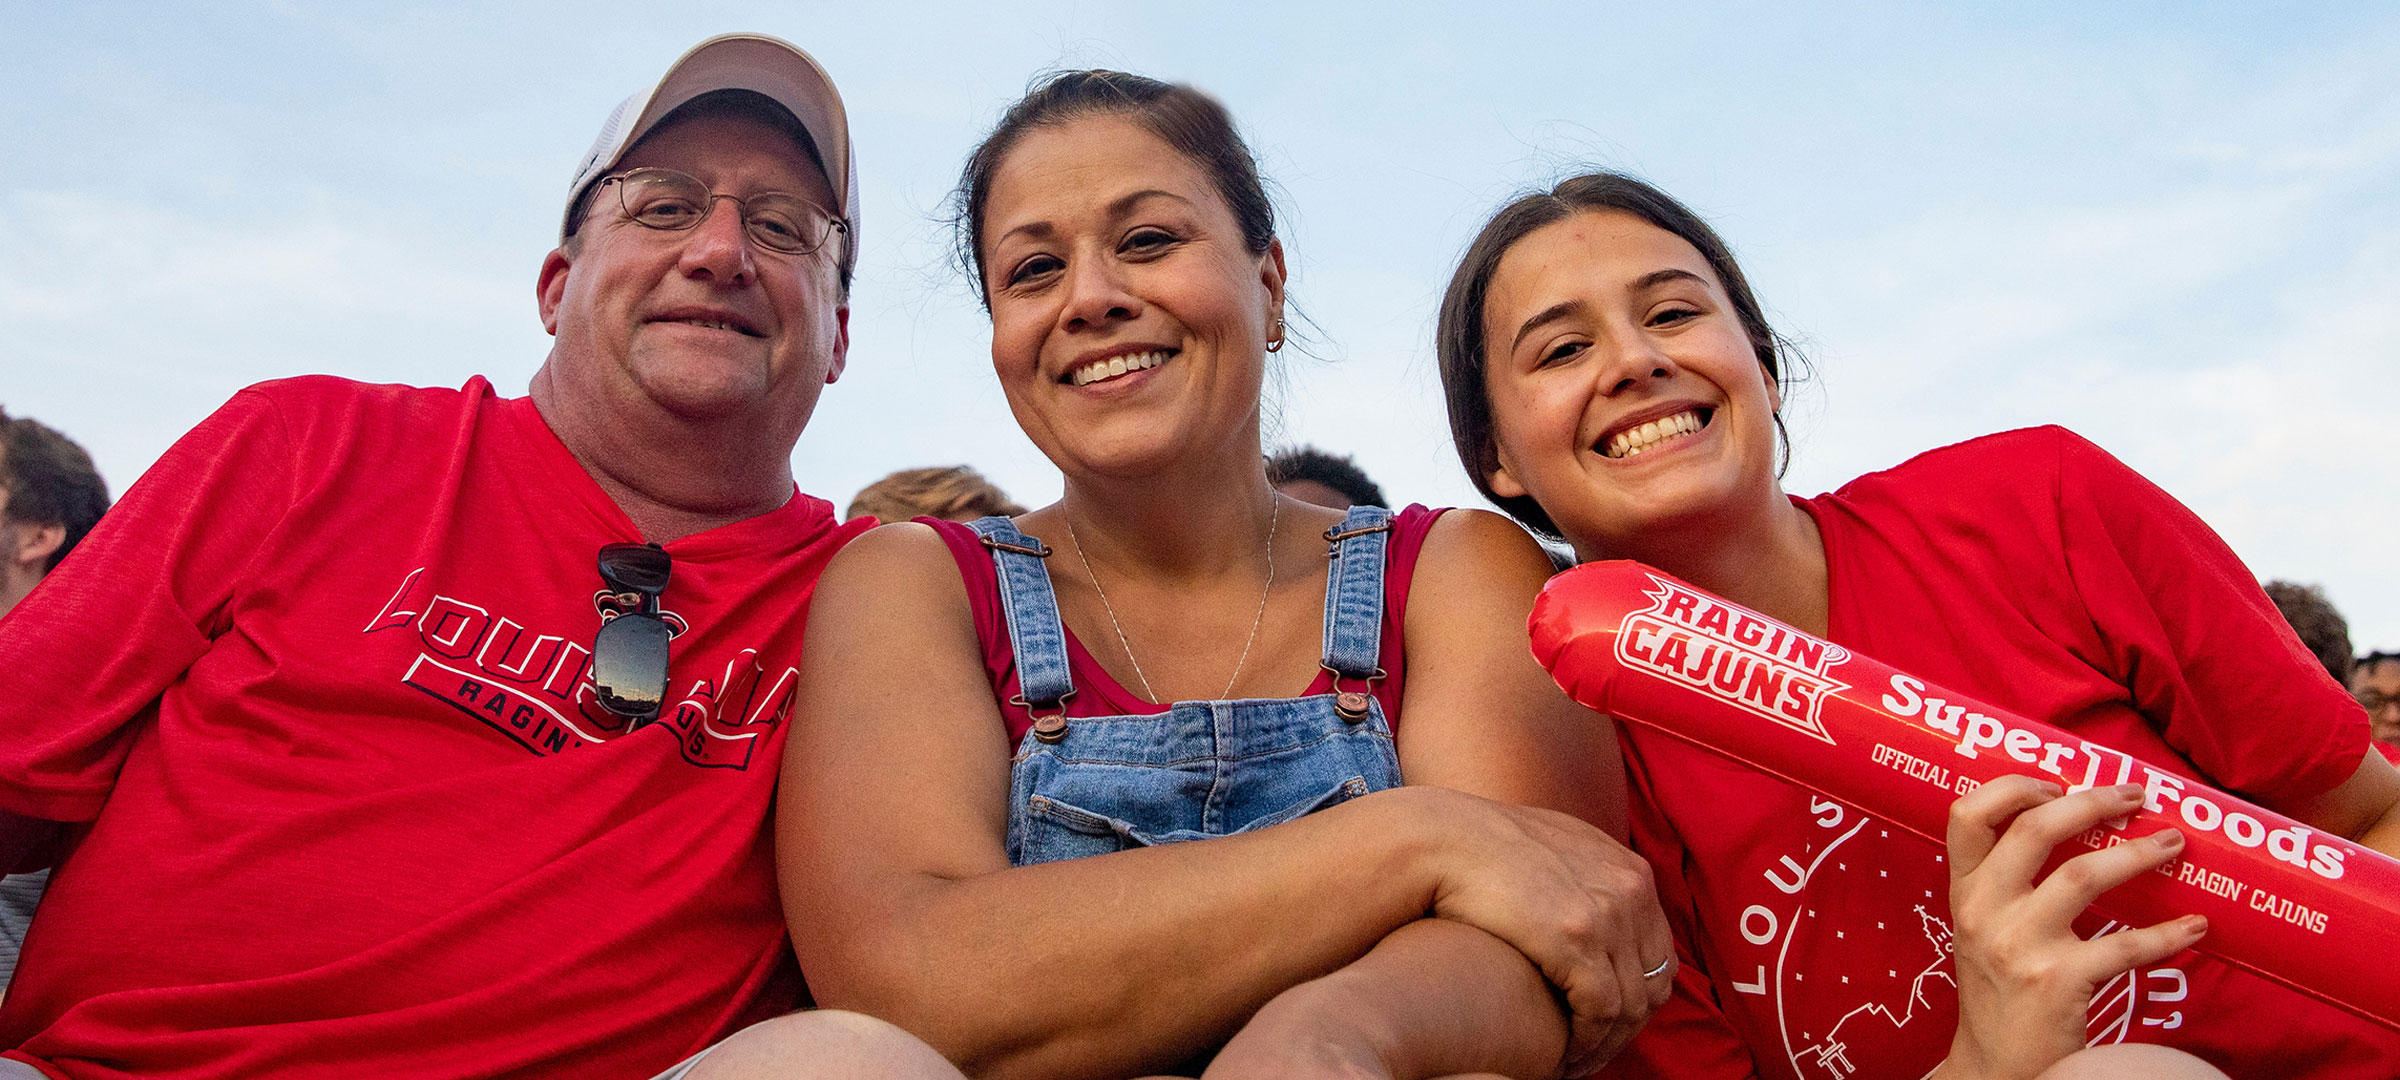 A UL Lafayette student with her parents in the stands at a Louisiana Ragin' Cajuns football game